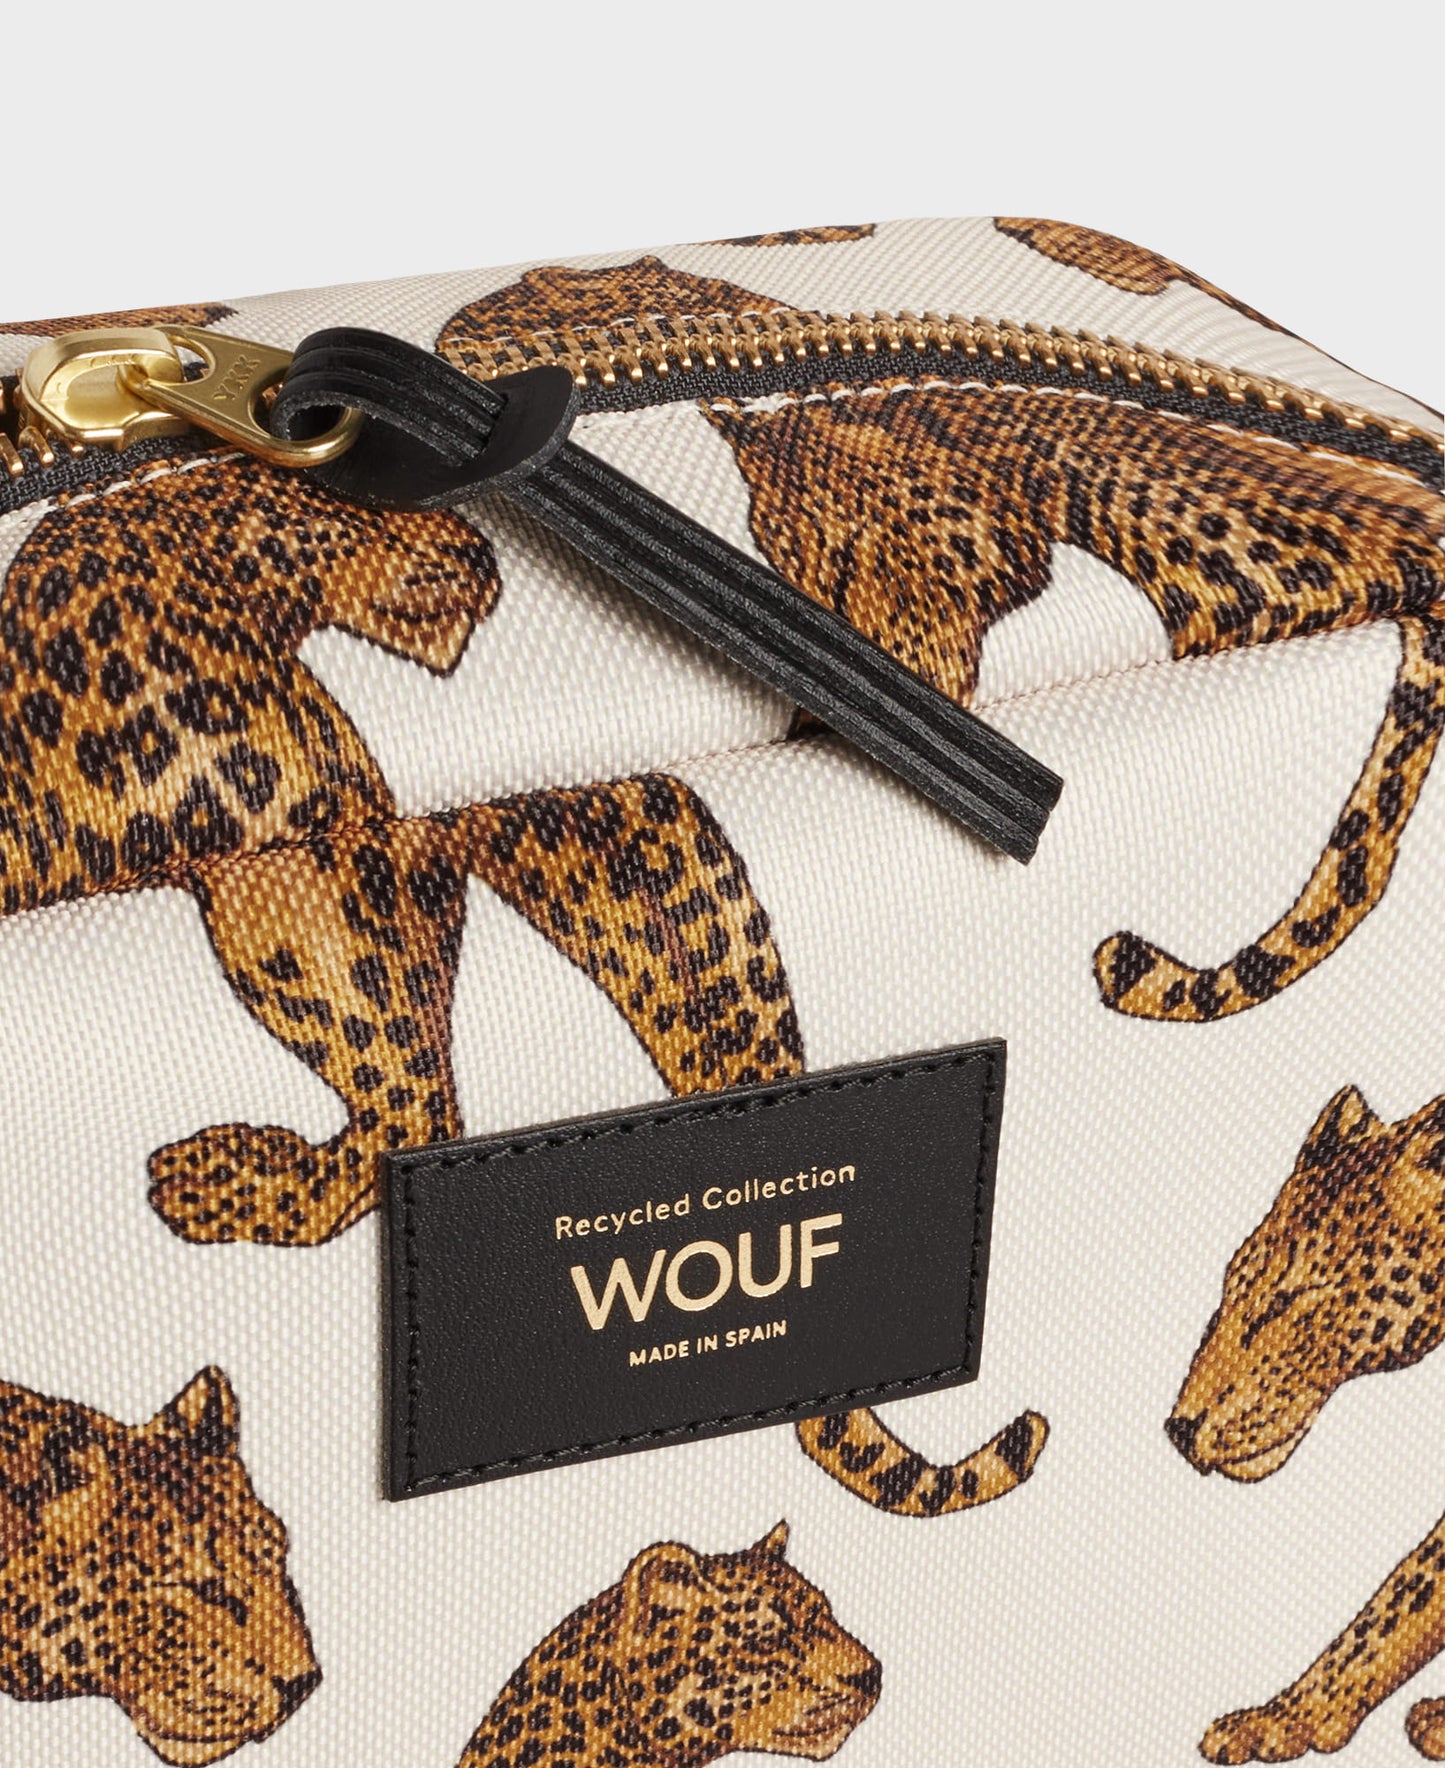 The Leopard Large Toiletry Bag